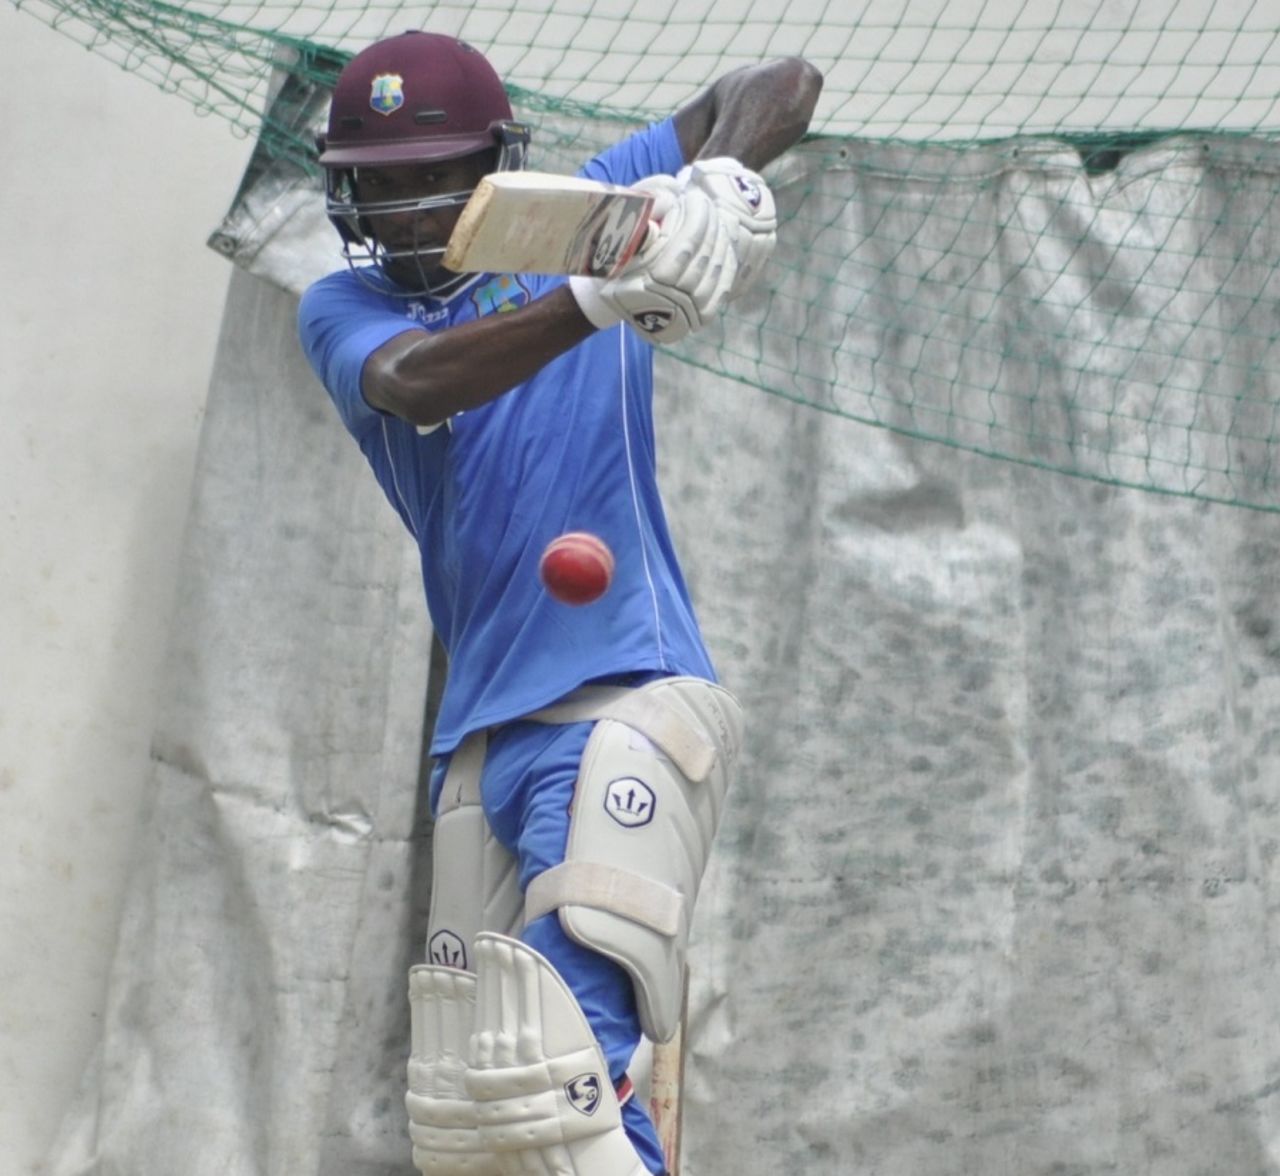 Jermaine Blackwood has a hit in the nets, Barbados, September 25, 2015